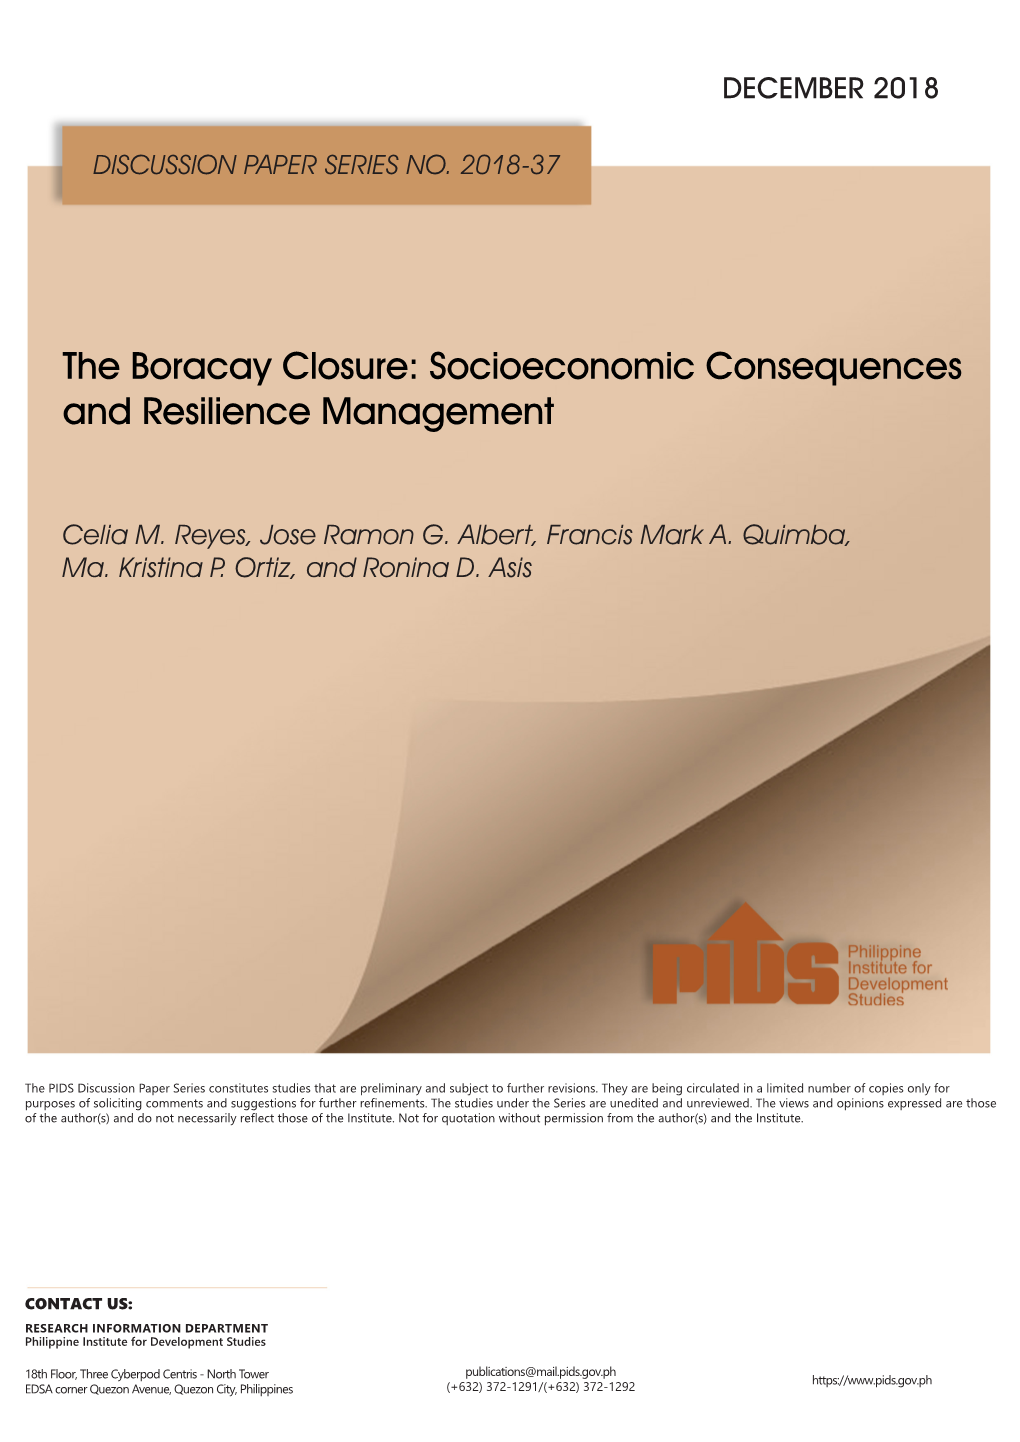 The Boracay Closure: Socioeconomic Consequences and Resilience Management